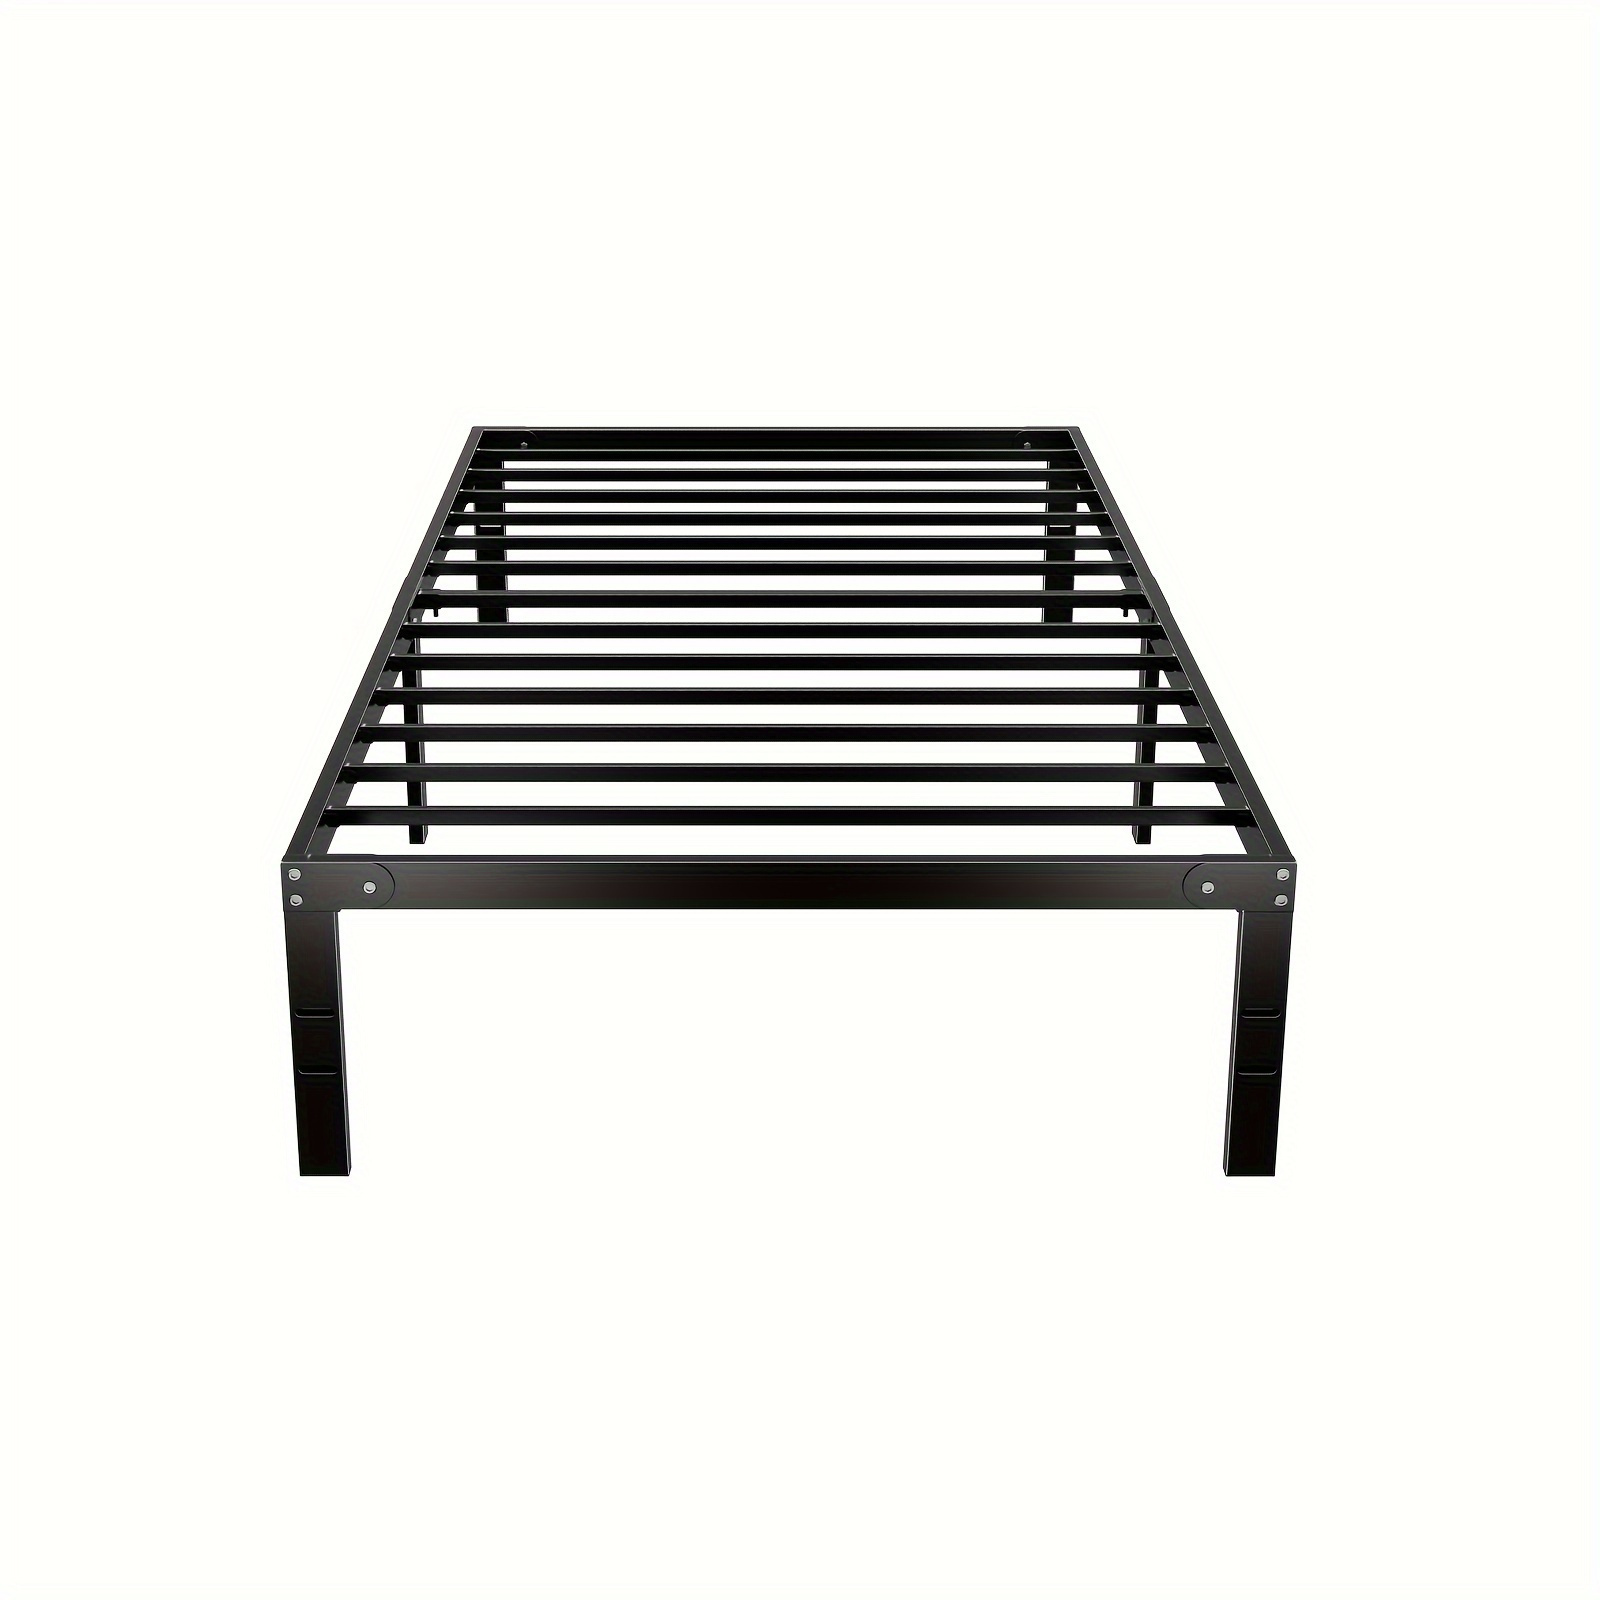 

Full Size Modern Metal Bed Frame, Sturdy Platform With Ample Under-bed Storage Space, No Box Spring Needed, Durable And Long-lasting Construction